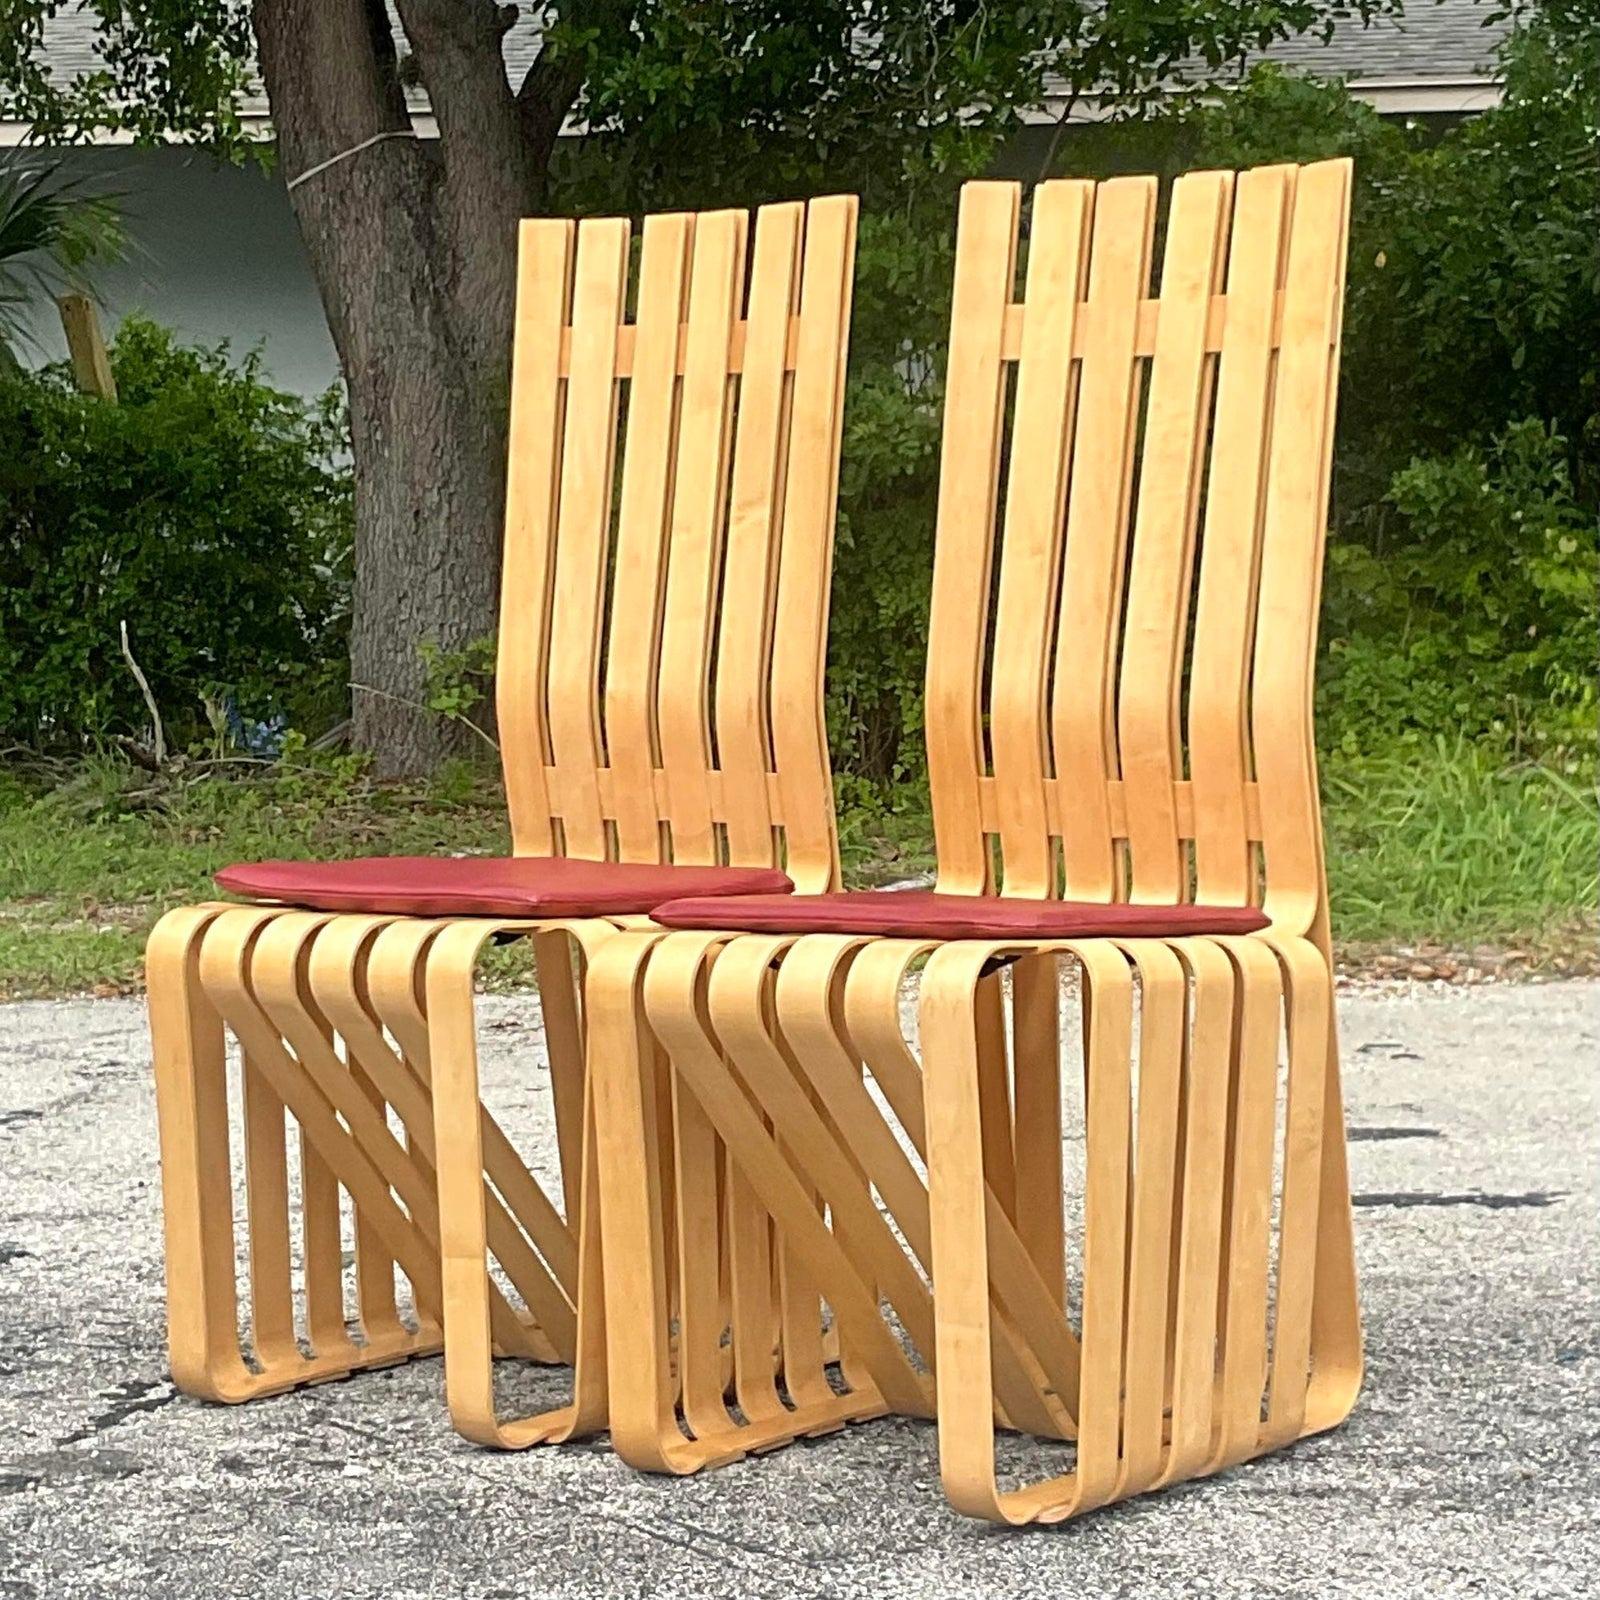 An exceptional pair of vintage Contemporary dining chairs. Designed by the iconic Frank Gehry for Knoll. Striking maple ribbons in a sculptural composition. Padded cushion in a pebble finish. A real collectors find. A matched pair in excellent